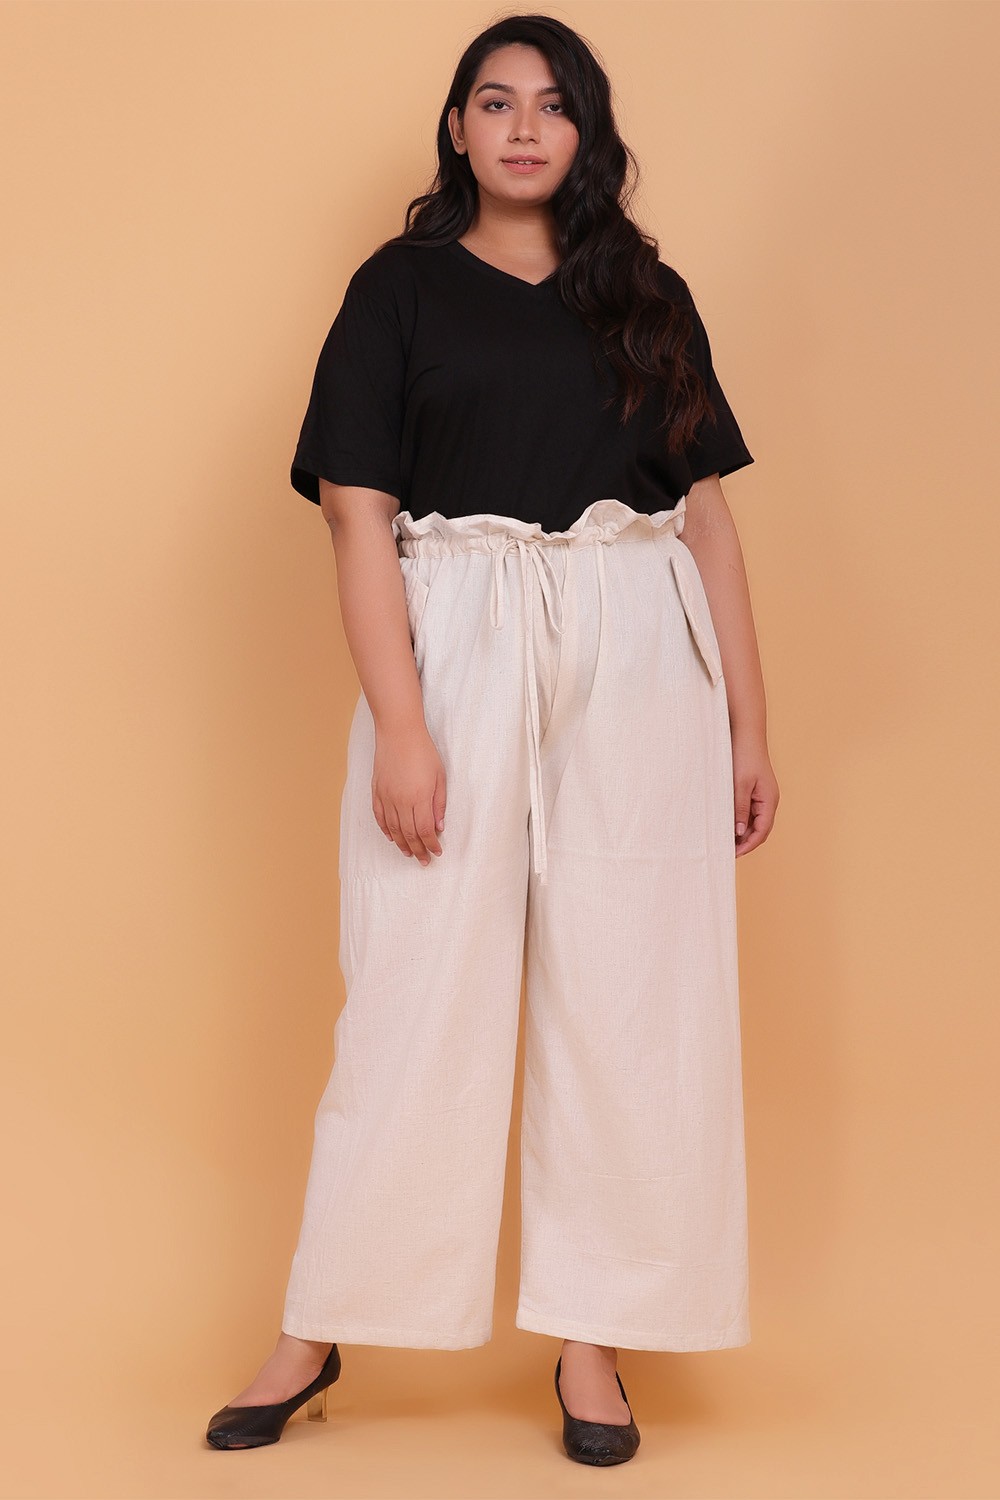 Plus Size Regular Fit Women White Trousers - Buy Plus Size Regular Fit  Women White Trousers Online at Best Prices in India | Flipkart.com